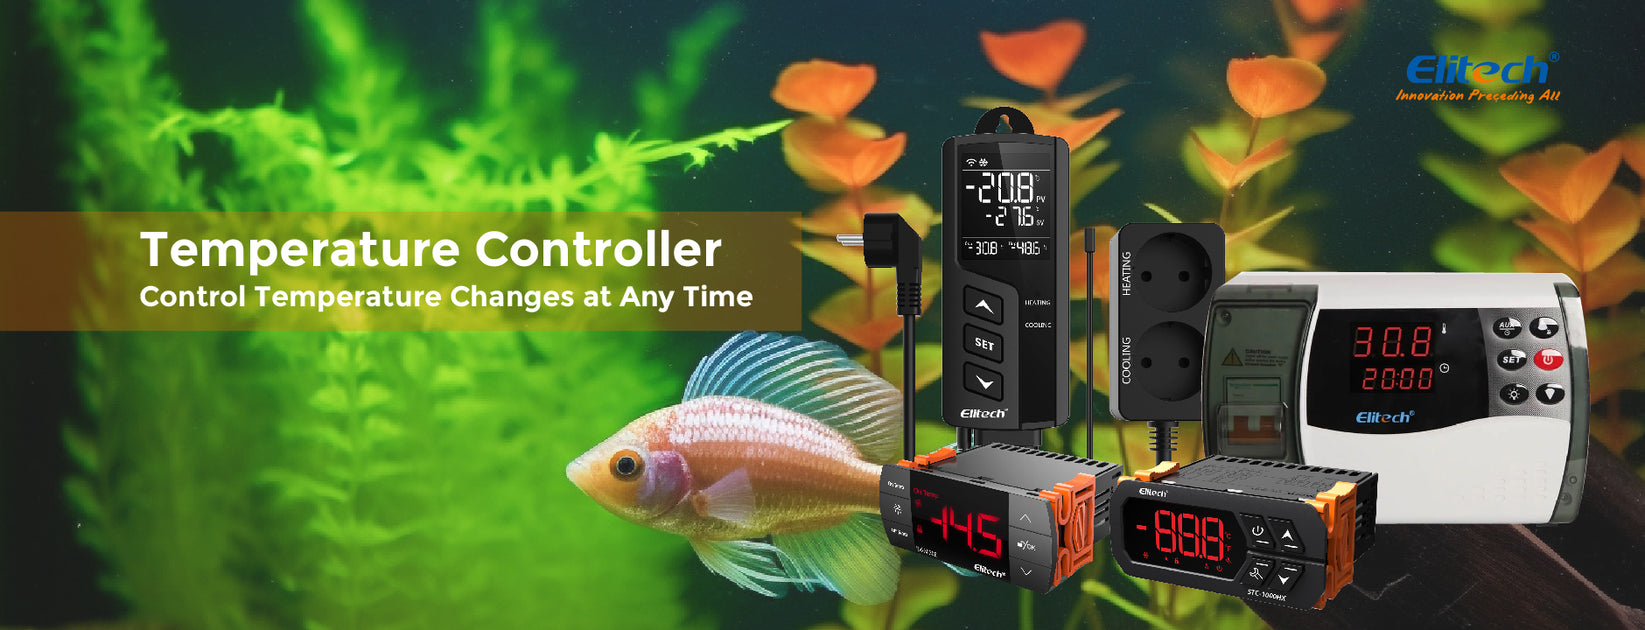 Smart Thermostat Temperature Control with LCD Display and Aquarium